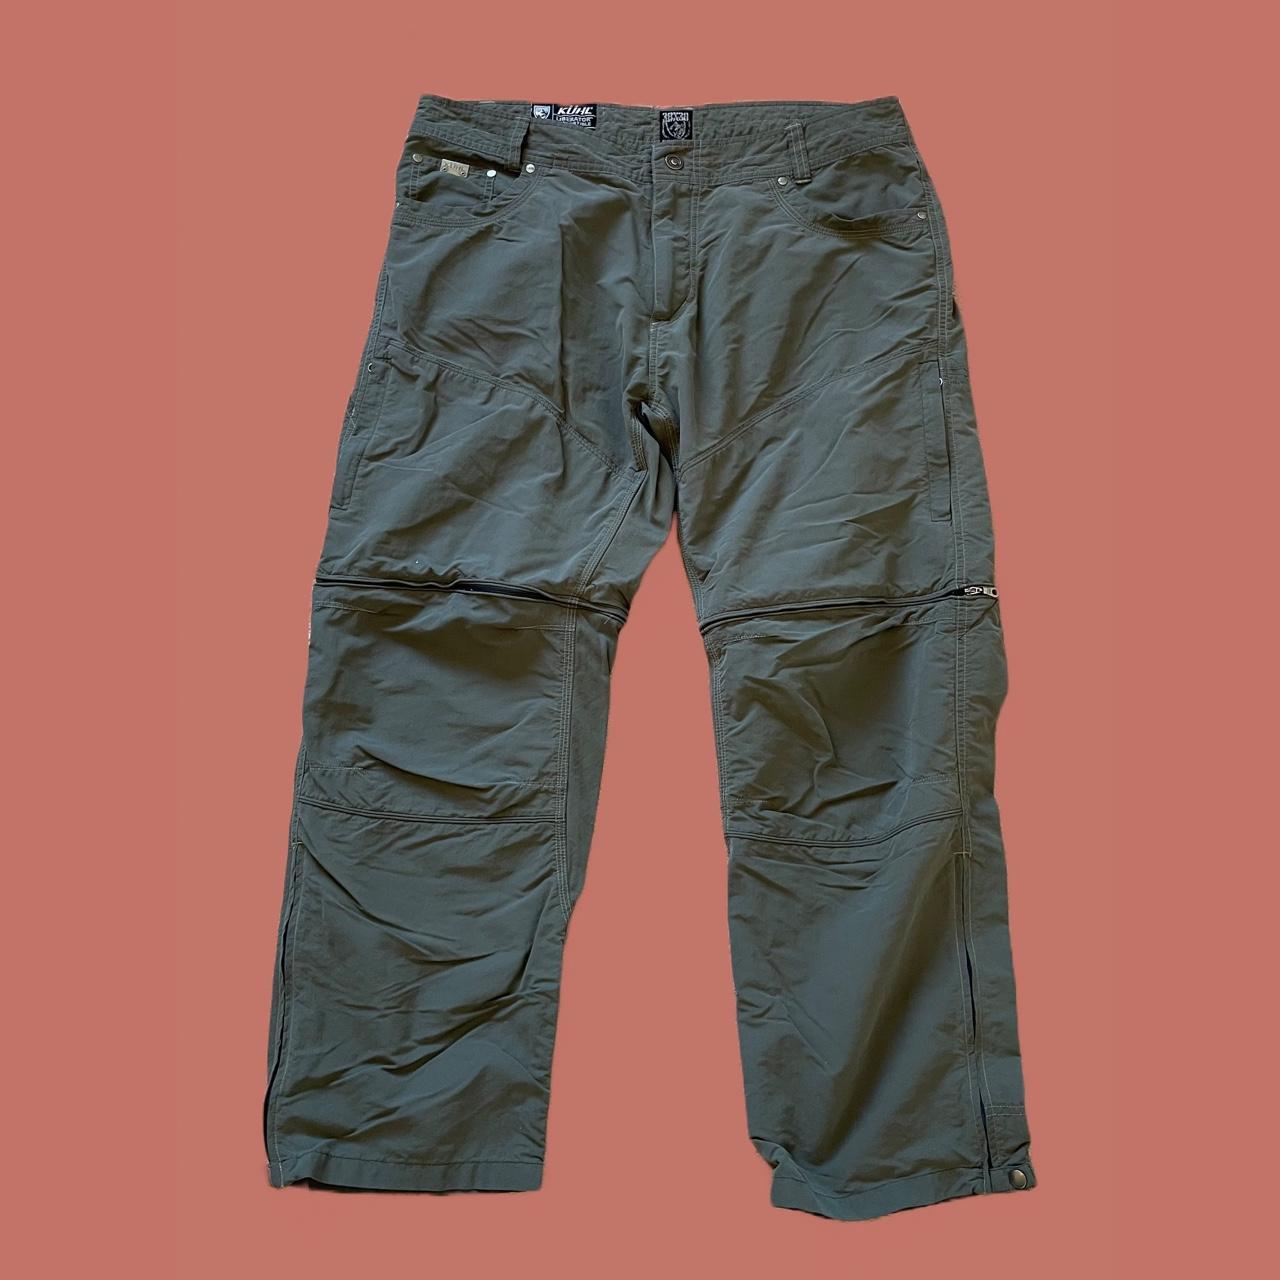 Kühl Clothing: Liberator Convertible Pant  Outdoor outfit, Hiking outfit, Hiking  pants